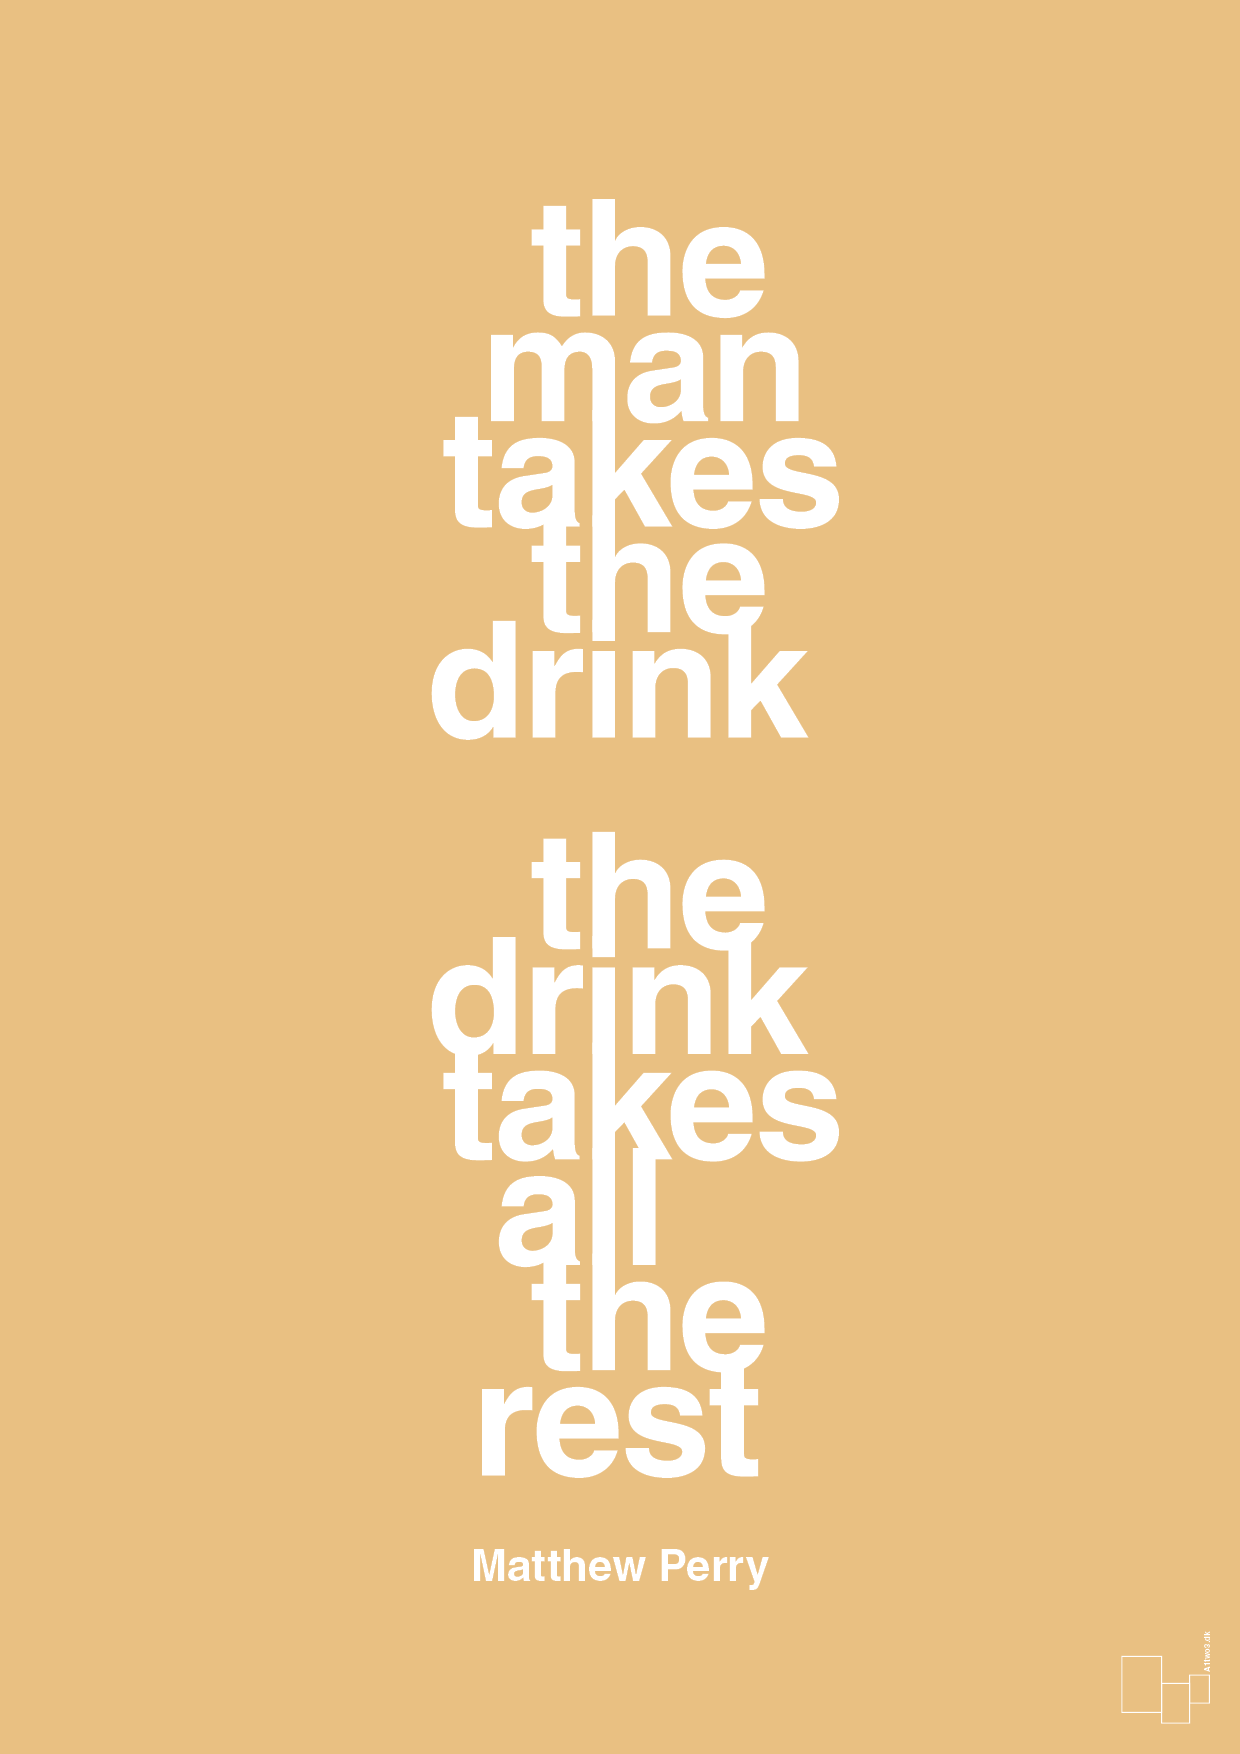 the man takes the drink the drink takes all the rest - Plakat med Citater i Charismatic